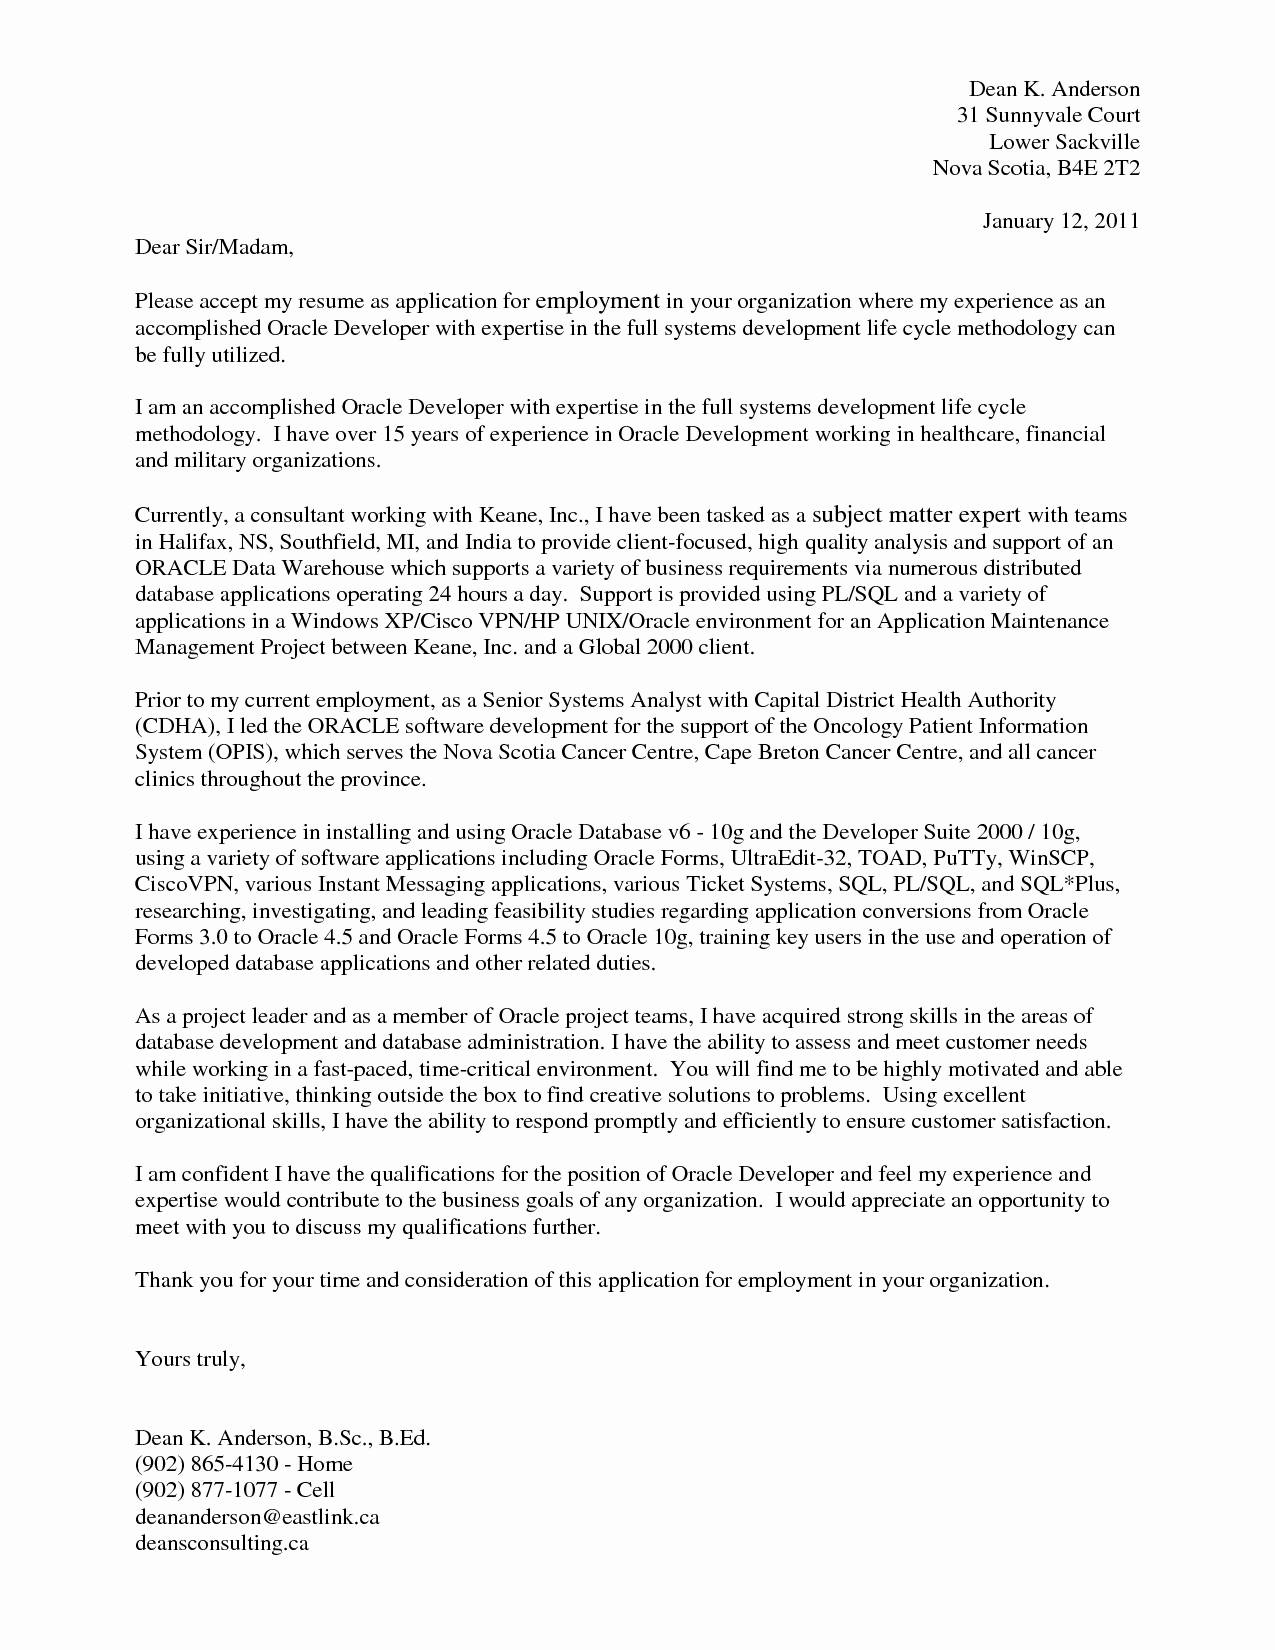 Asset Management Cover Letter Template - 15 New Cover Letter Example for It Job Application Resume